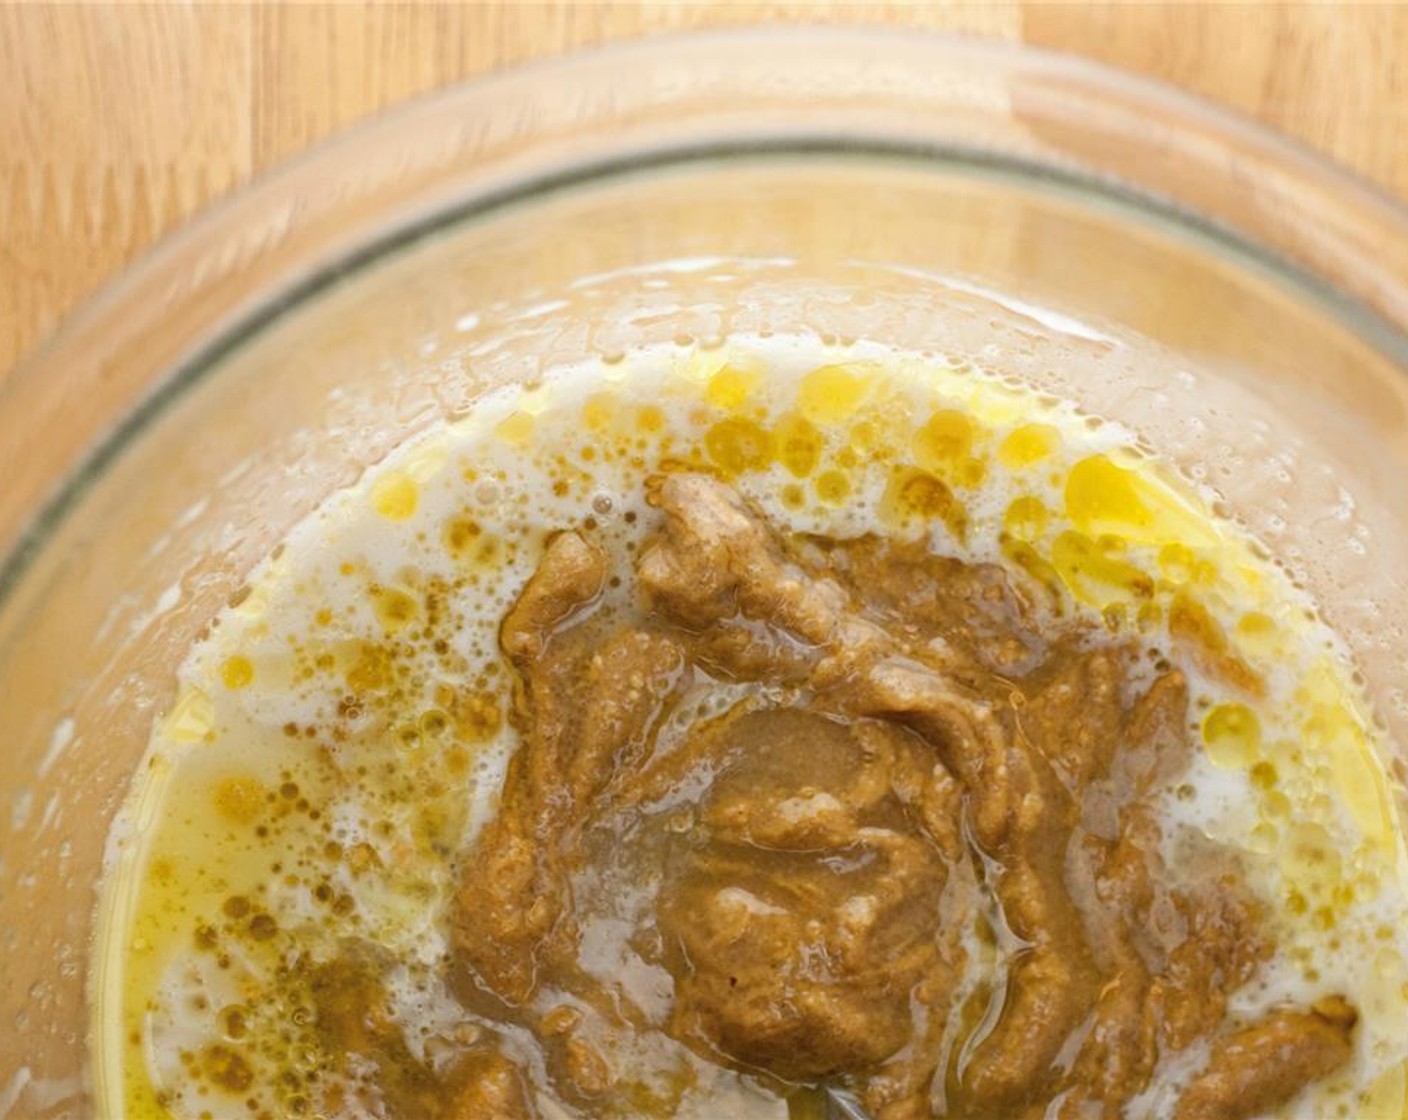 step 2 In a large bowl, mix together the wet ingredients: Creamy Natural Peanut Butter (1/3 cup), Olive Oil (2 Tbsp), Vegan Sugar (3/4 cup), Coconut Milk (1/3 cup), and Kahlua (1 tsp). Stir until well combined.